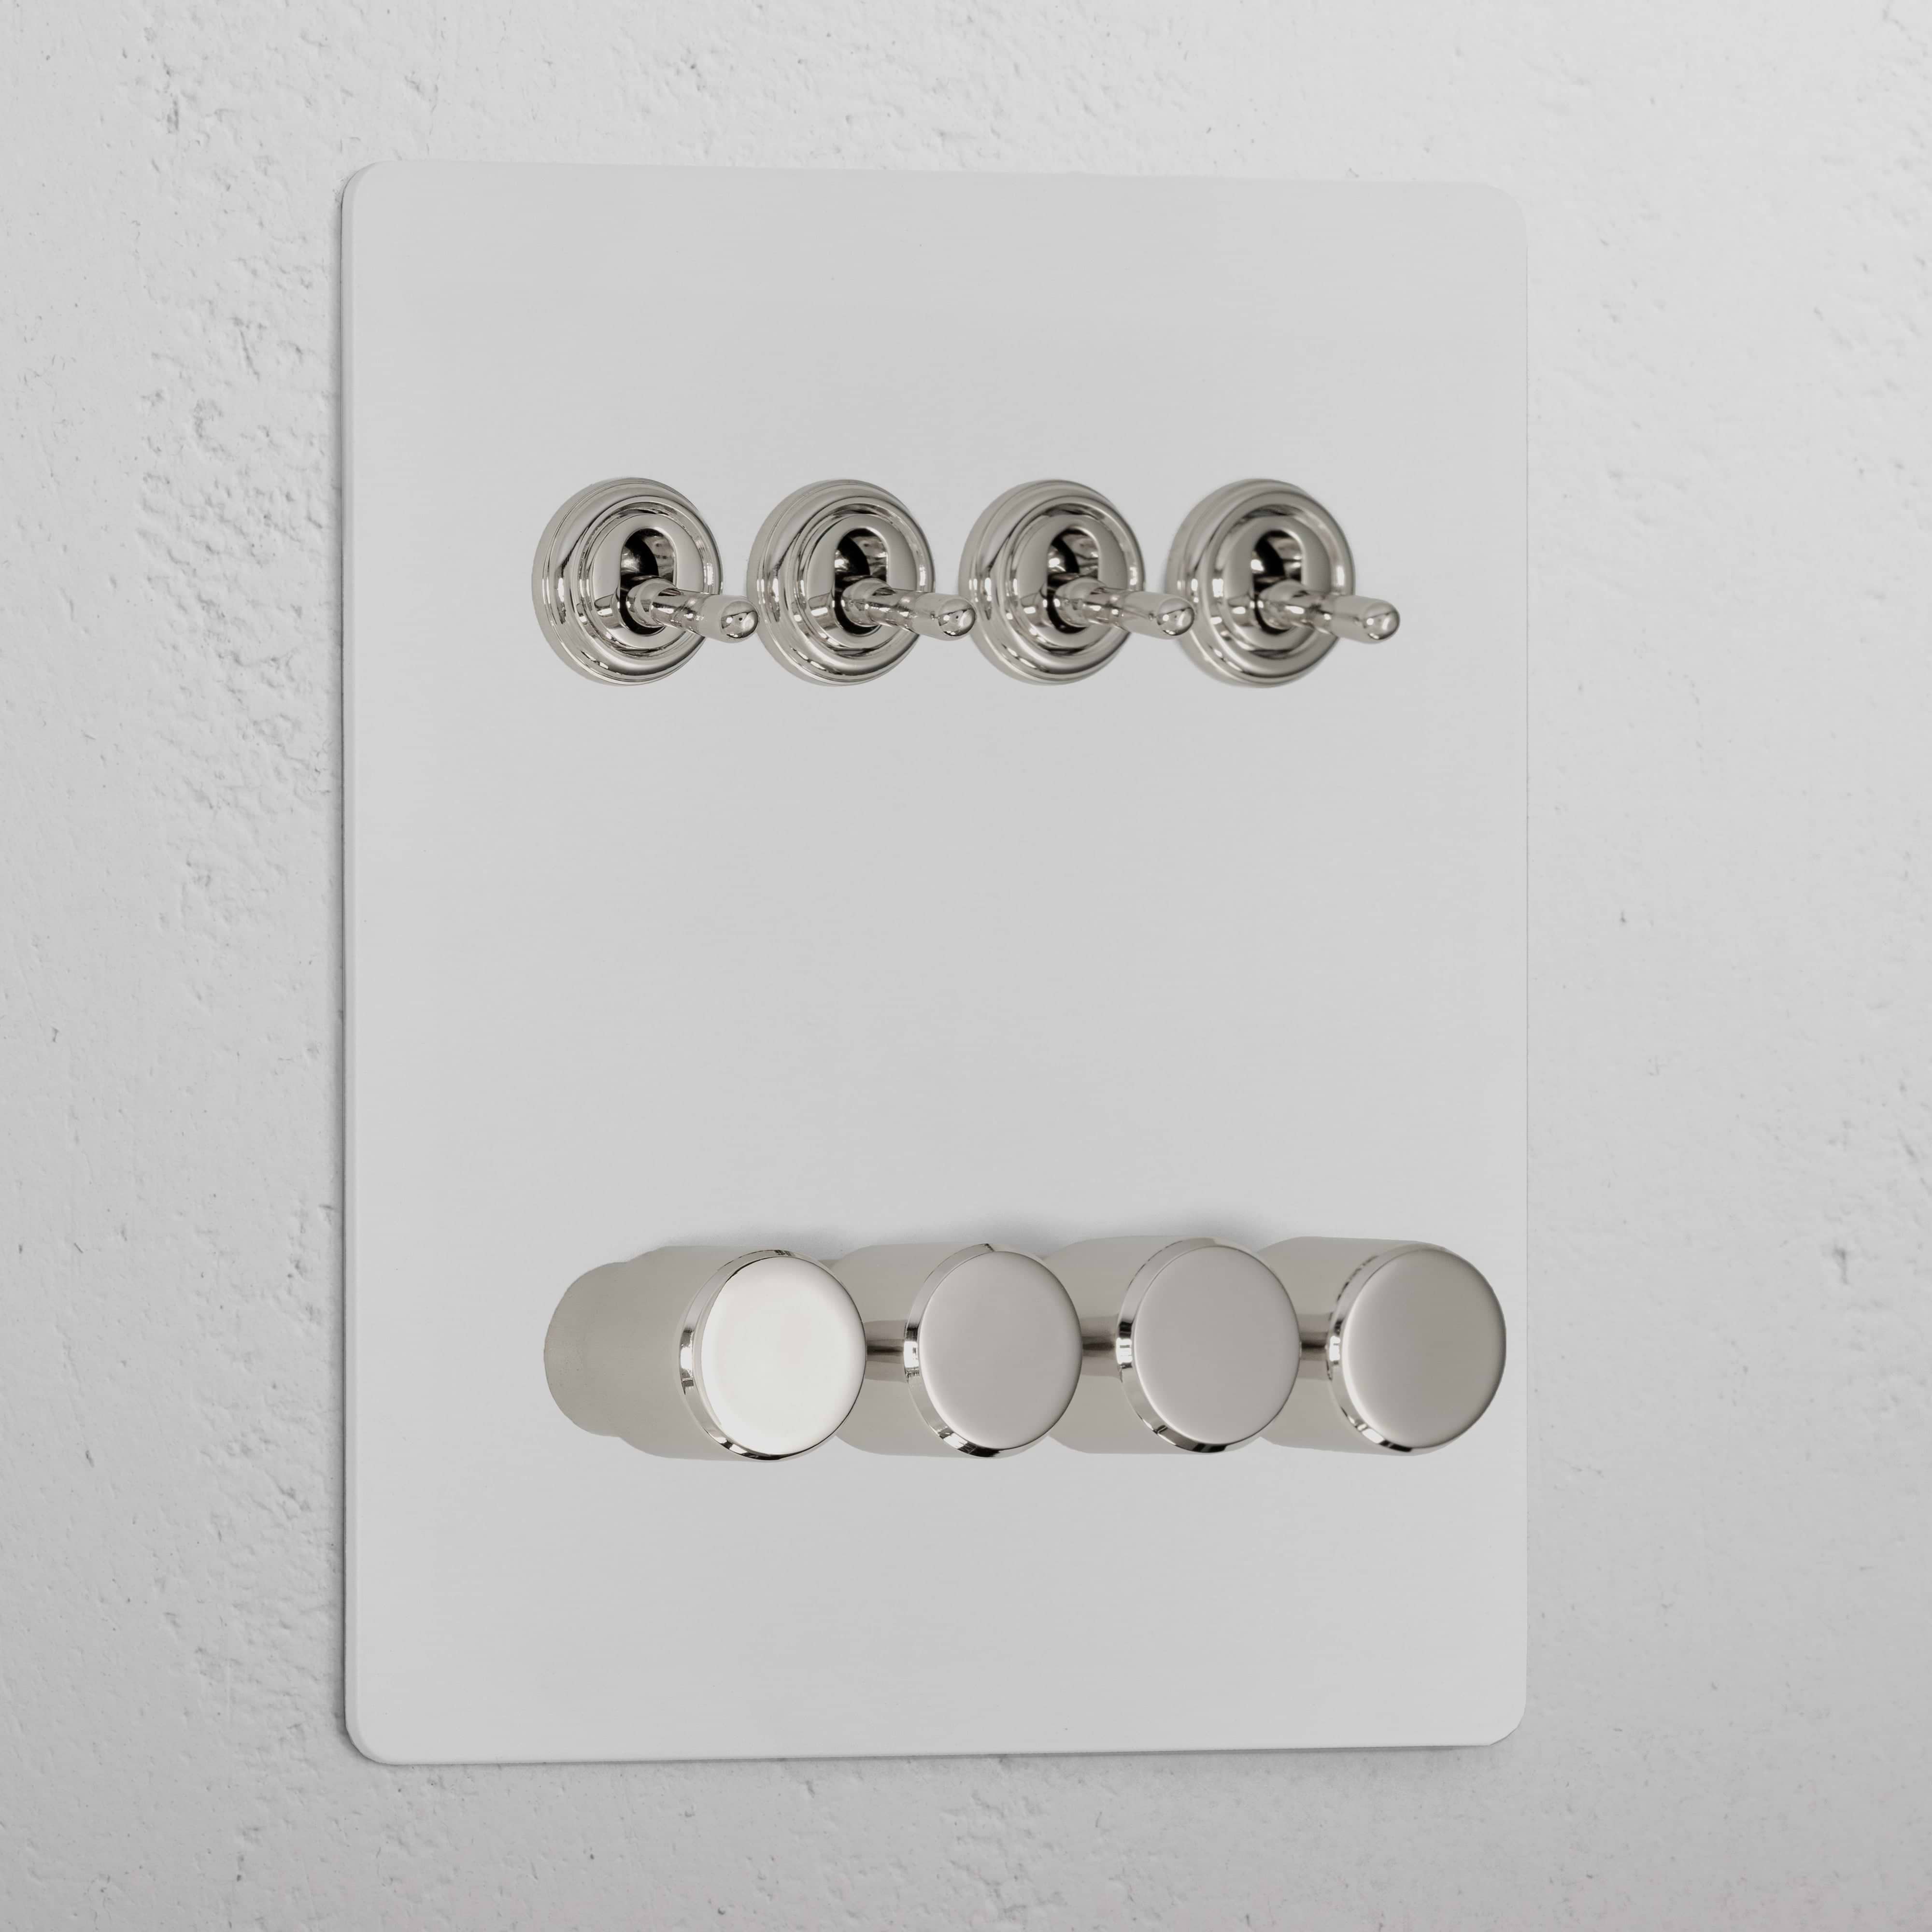 8G Mixed Switch 4T4D - Paintable Polished Nickel